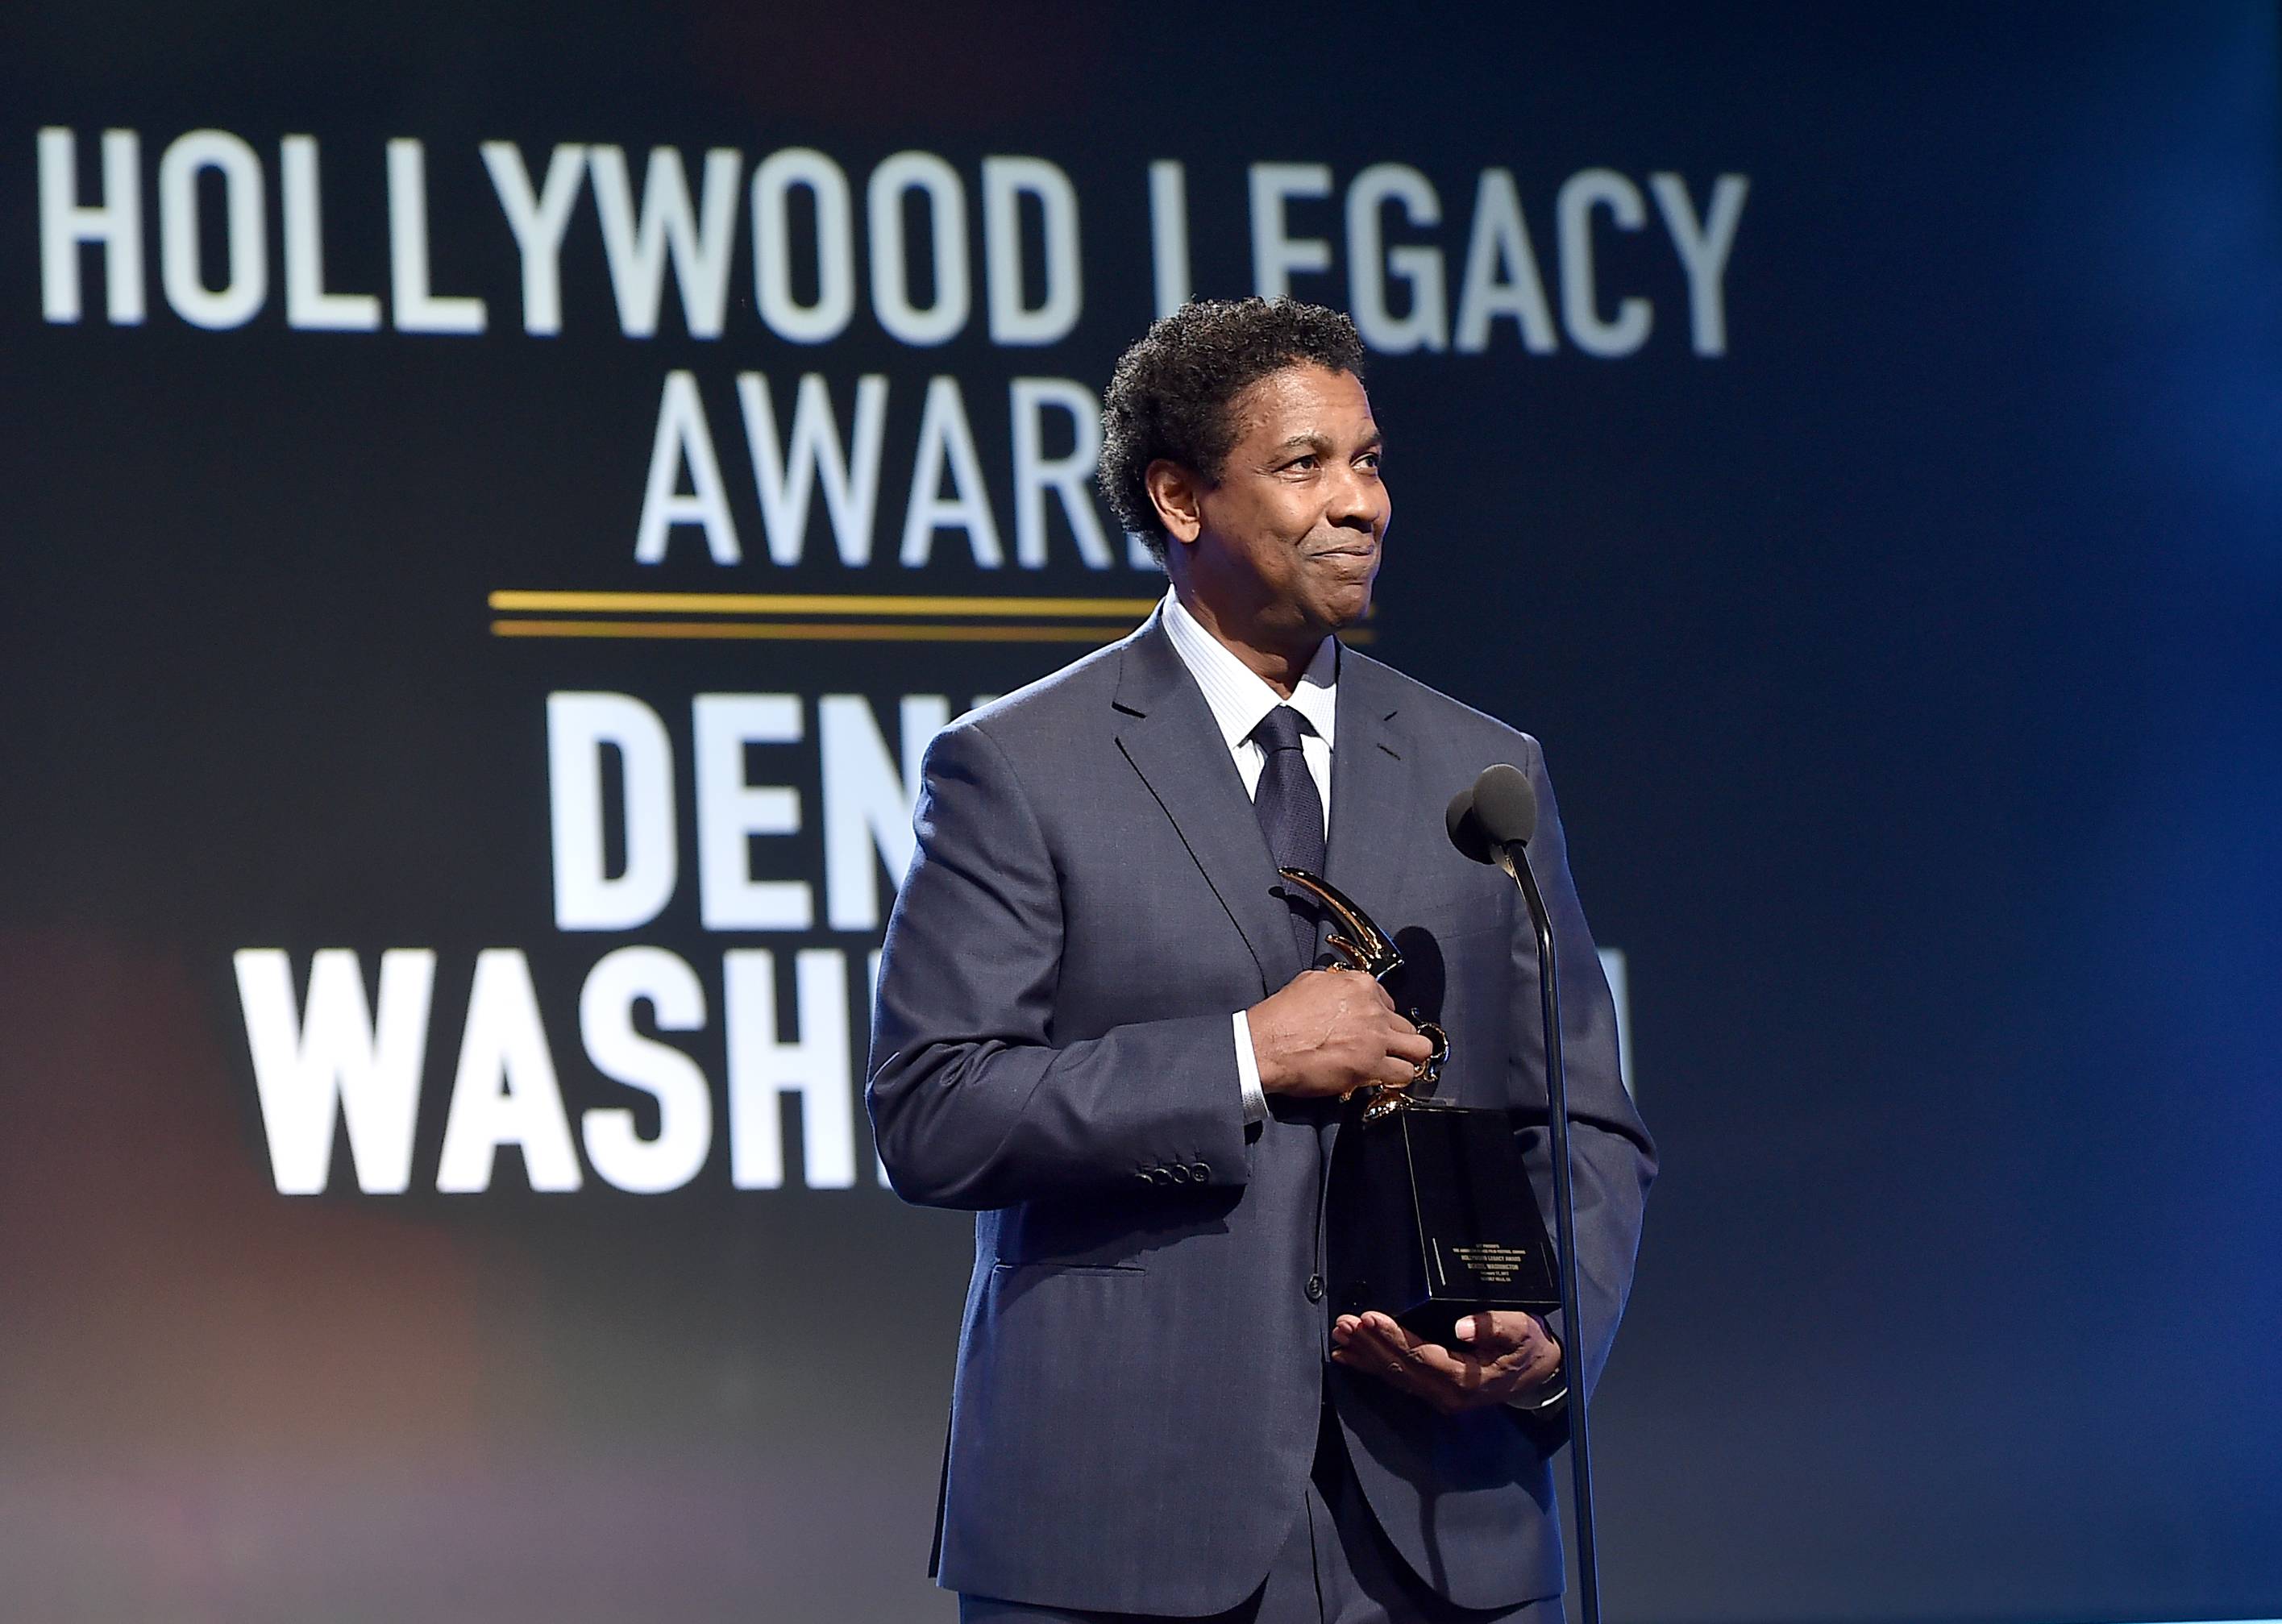 A Legacy Unmatched - Denzel Washington is a gift to Hollywood.&nbsp;(Photo by Alberto E. Rodriguez/Getty Images)&nbsp;